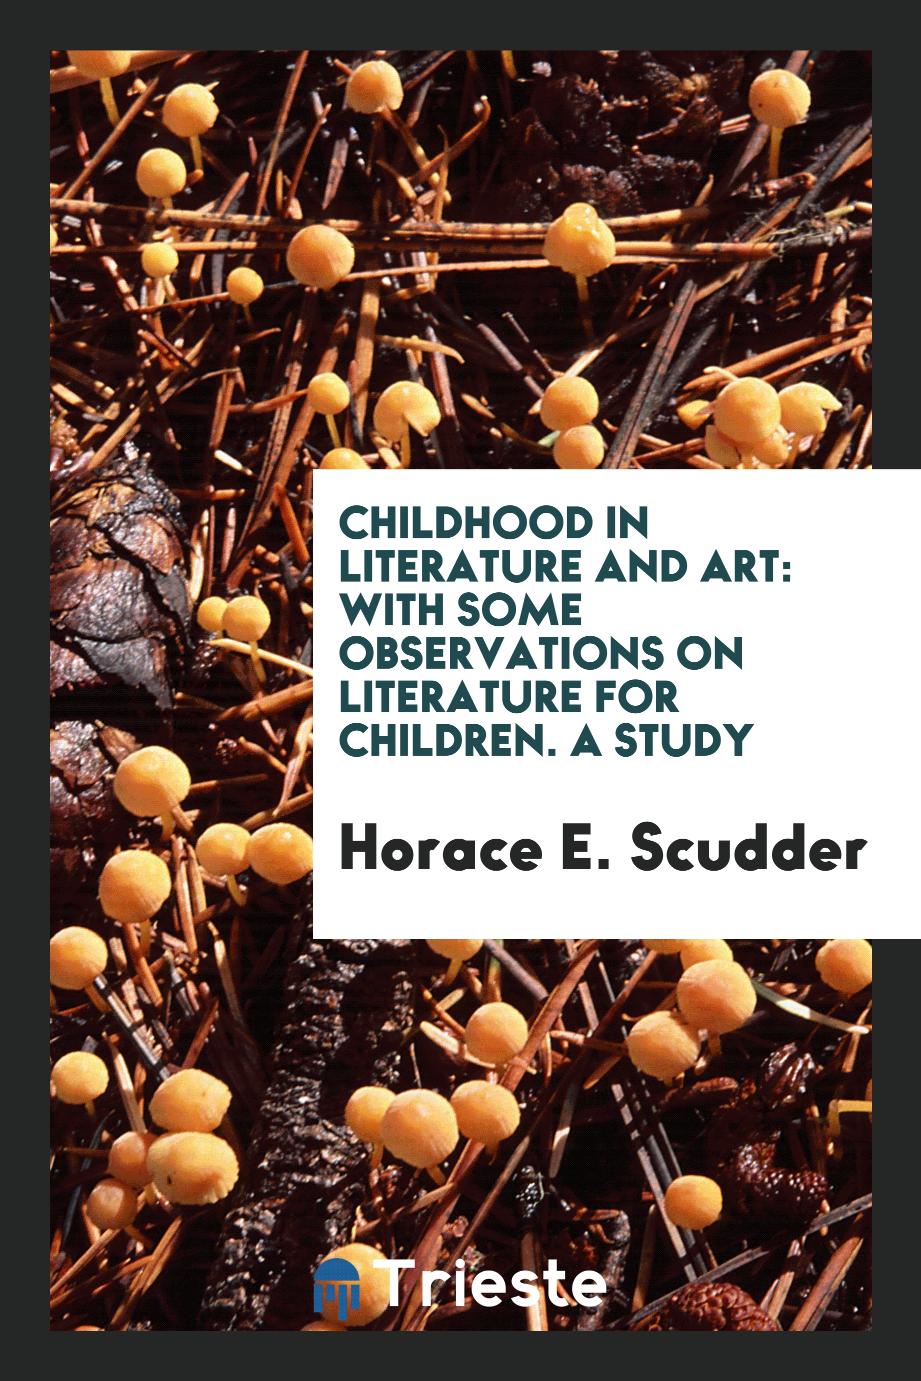 Childhood in Literature and Art: With Some Observations on Literature for Children. A Study